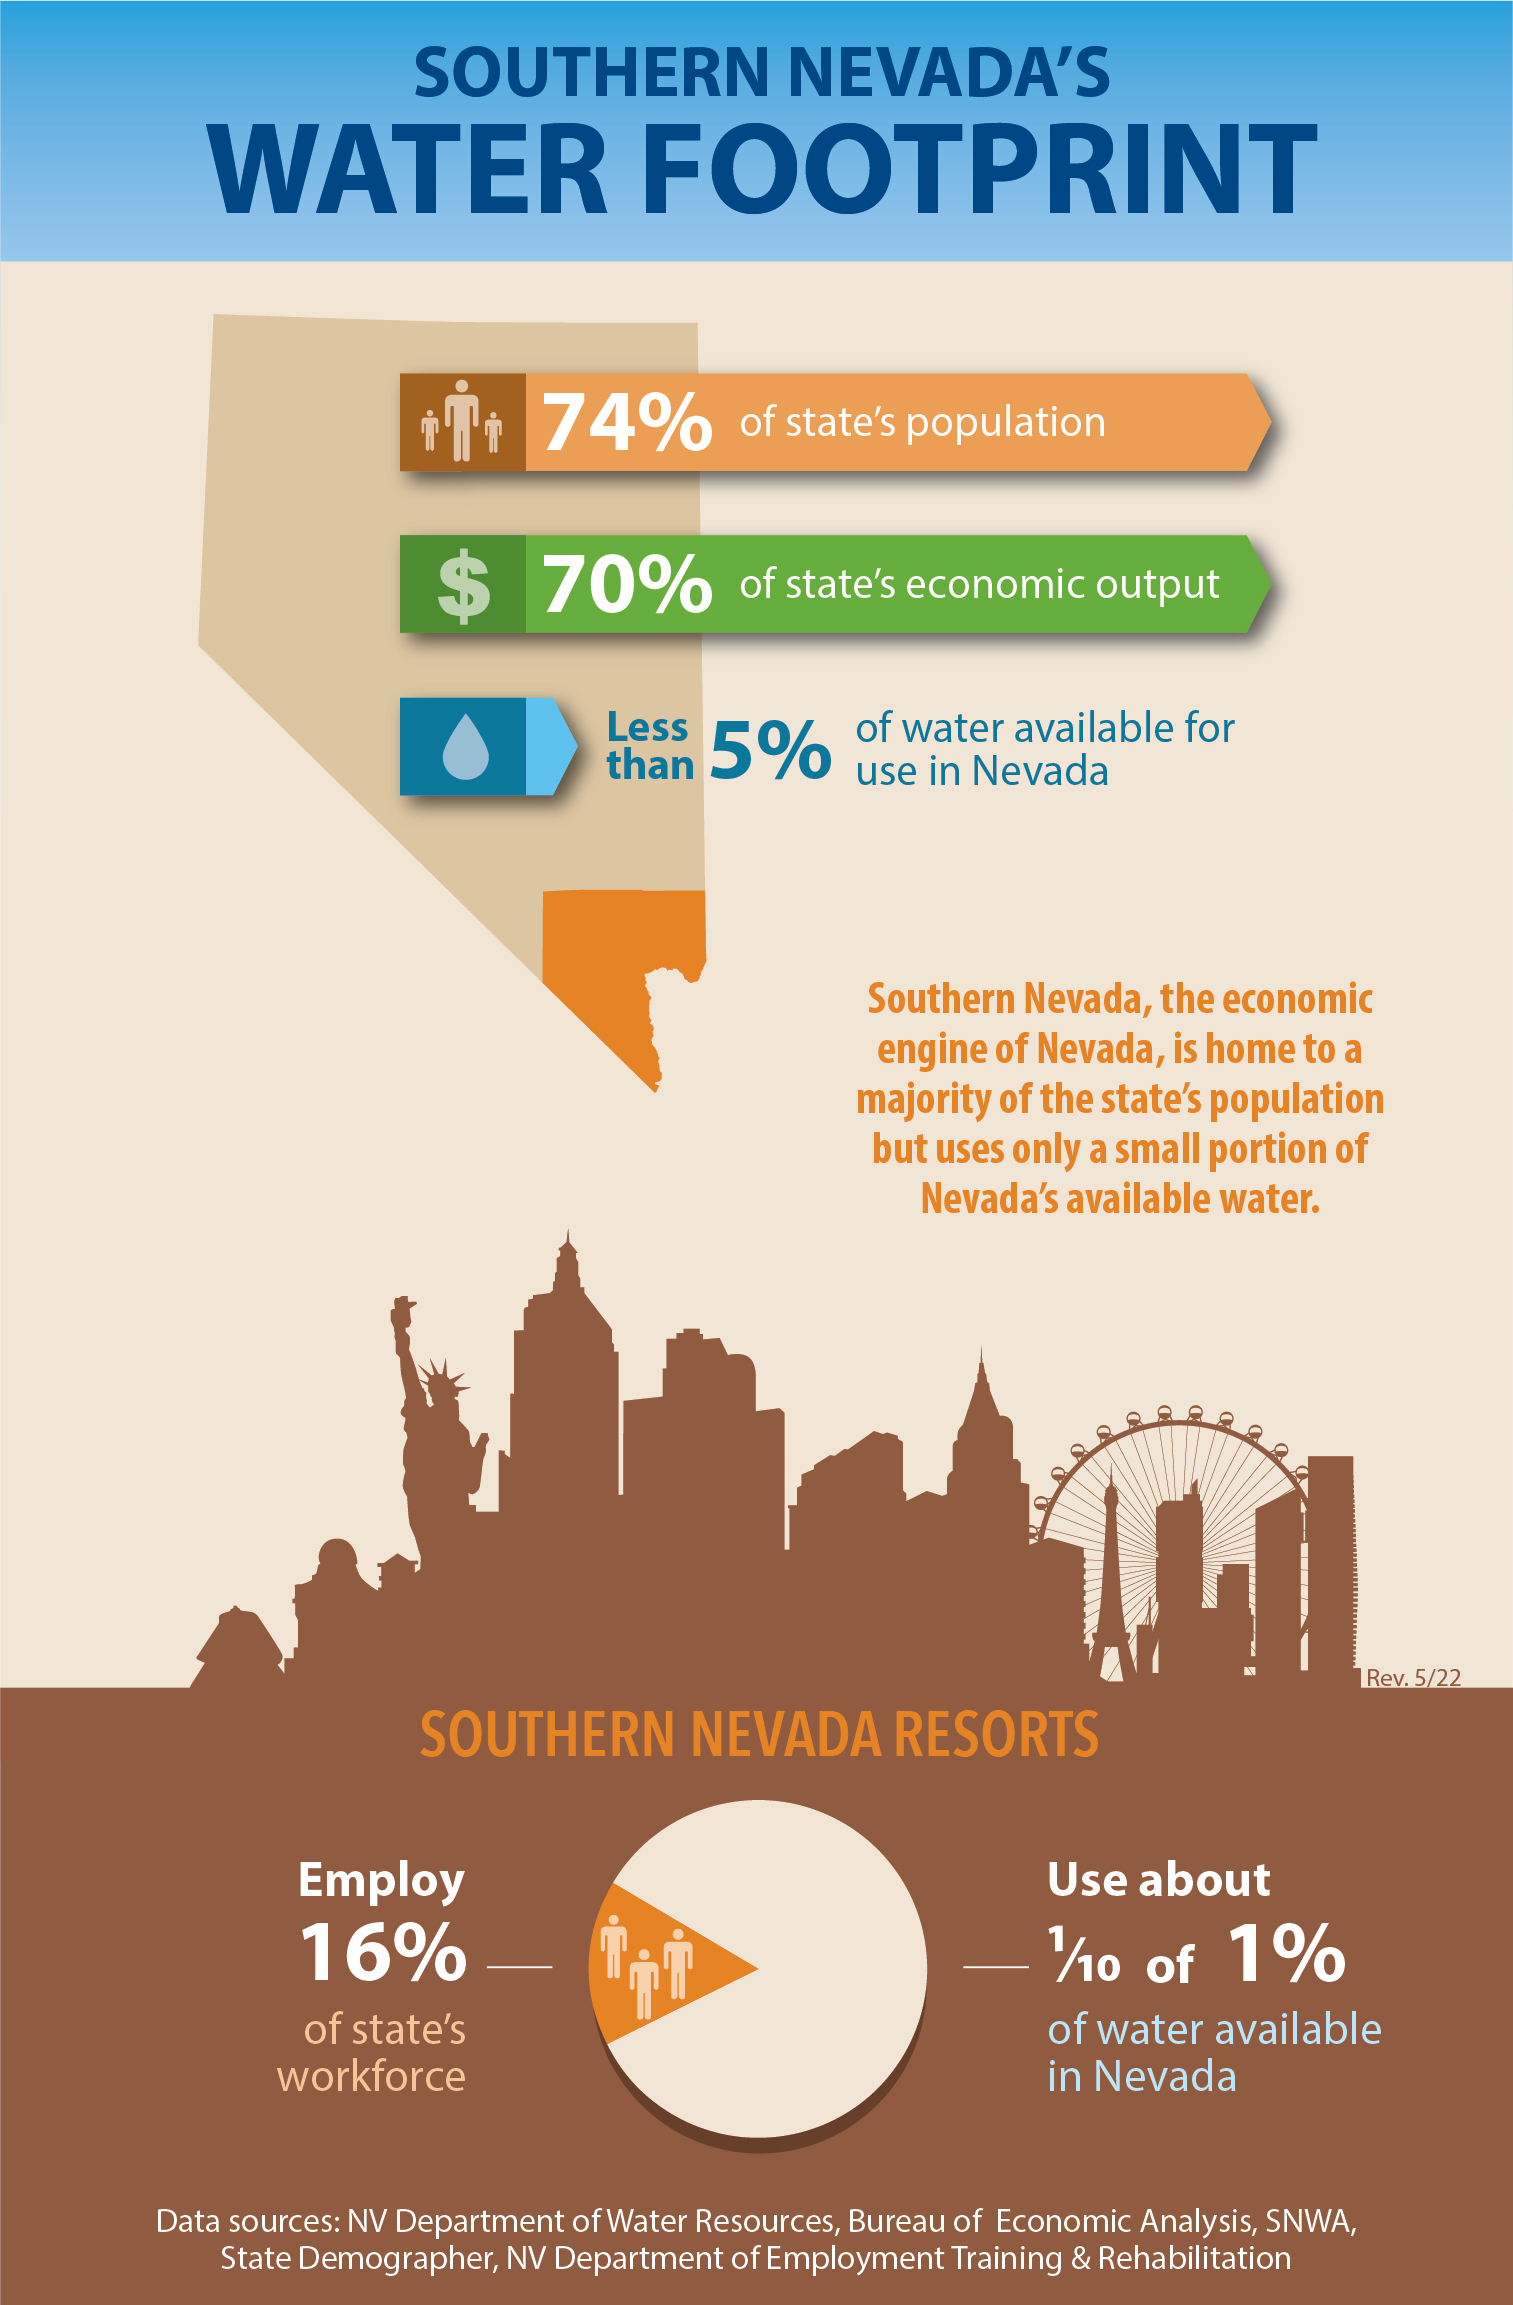 Graphic shows that Southern Nevada resorts employ 16% of the state's workforce and use about 1/10 of 1% of water available in Nevada